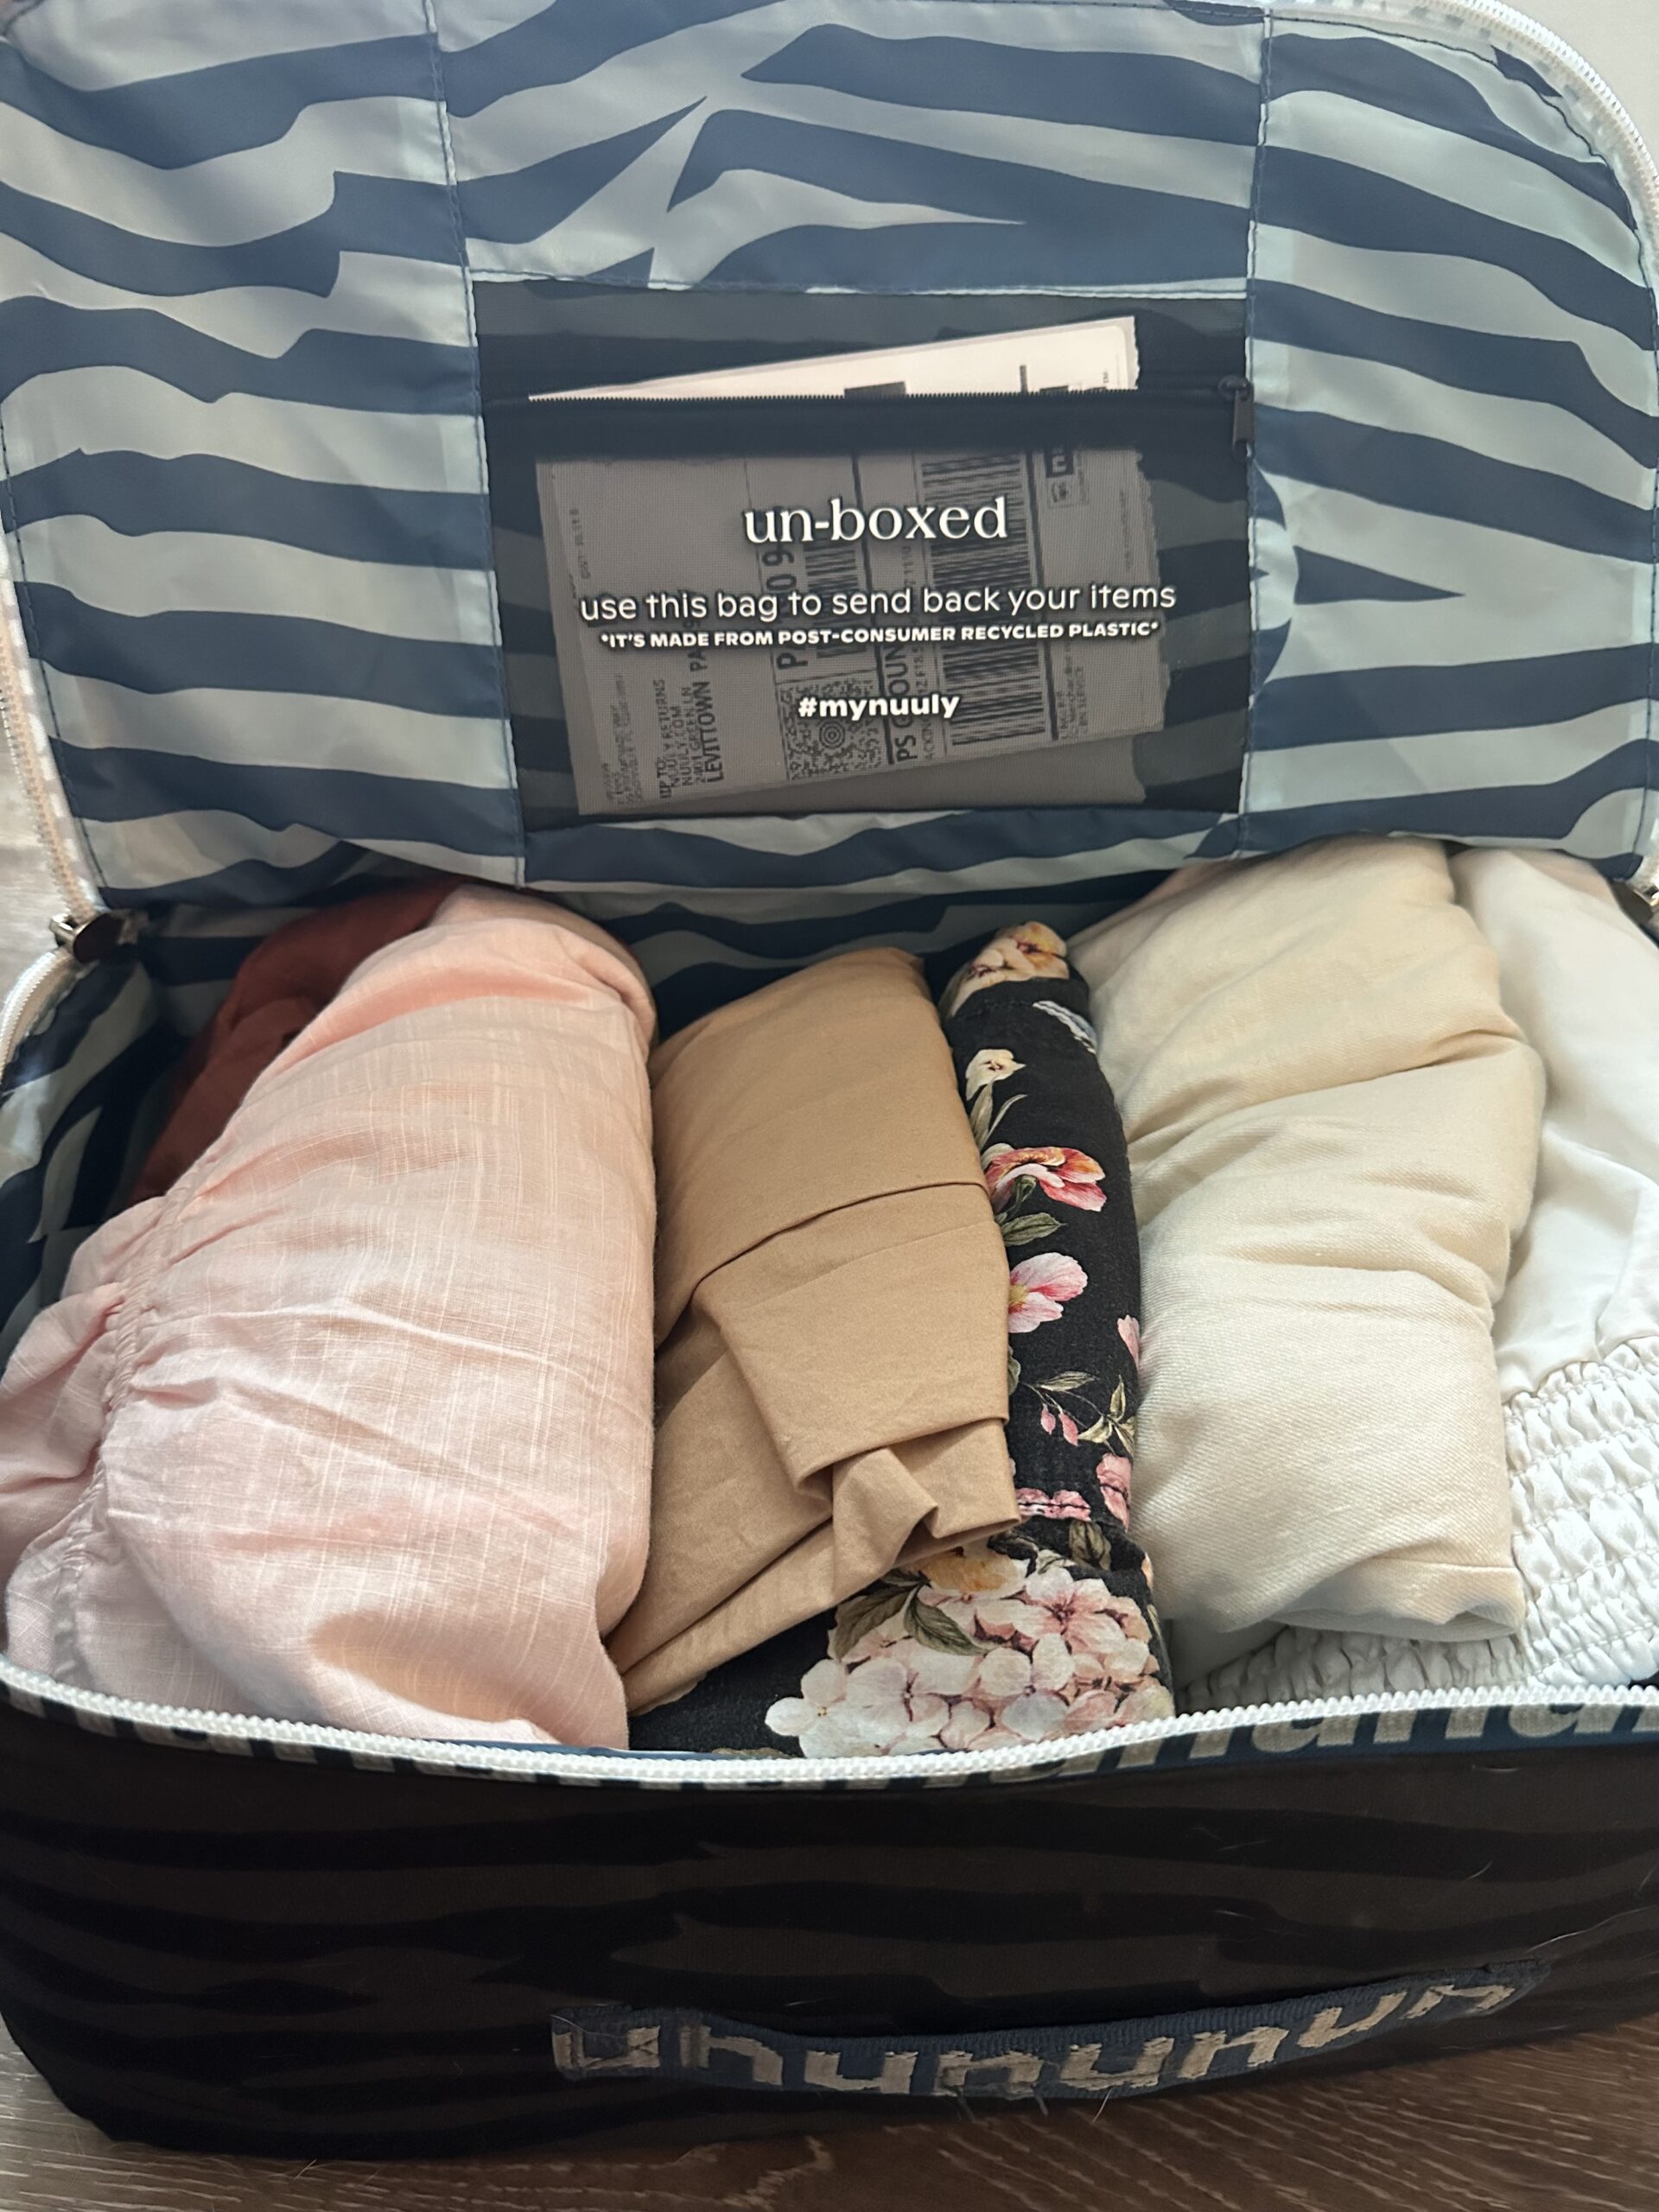 A suitcase open on a wooden floor, packed with neatly folded clothes in various colors and patterns, featuring a return shipping label inside the lid.